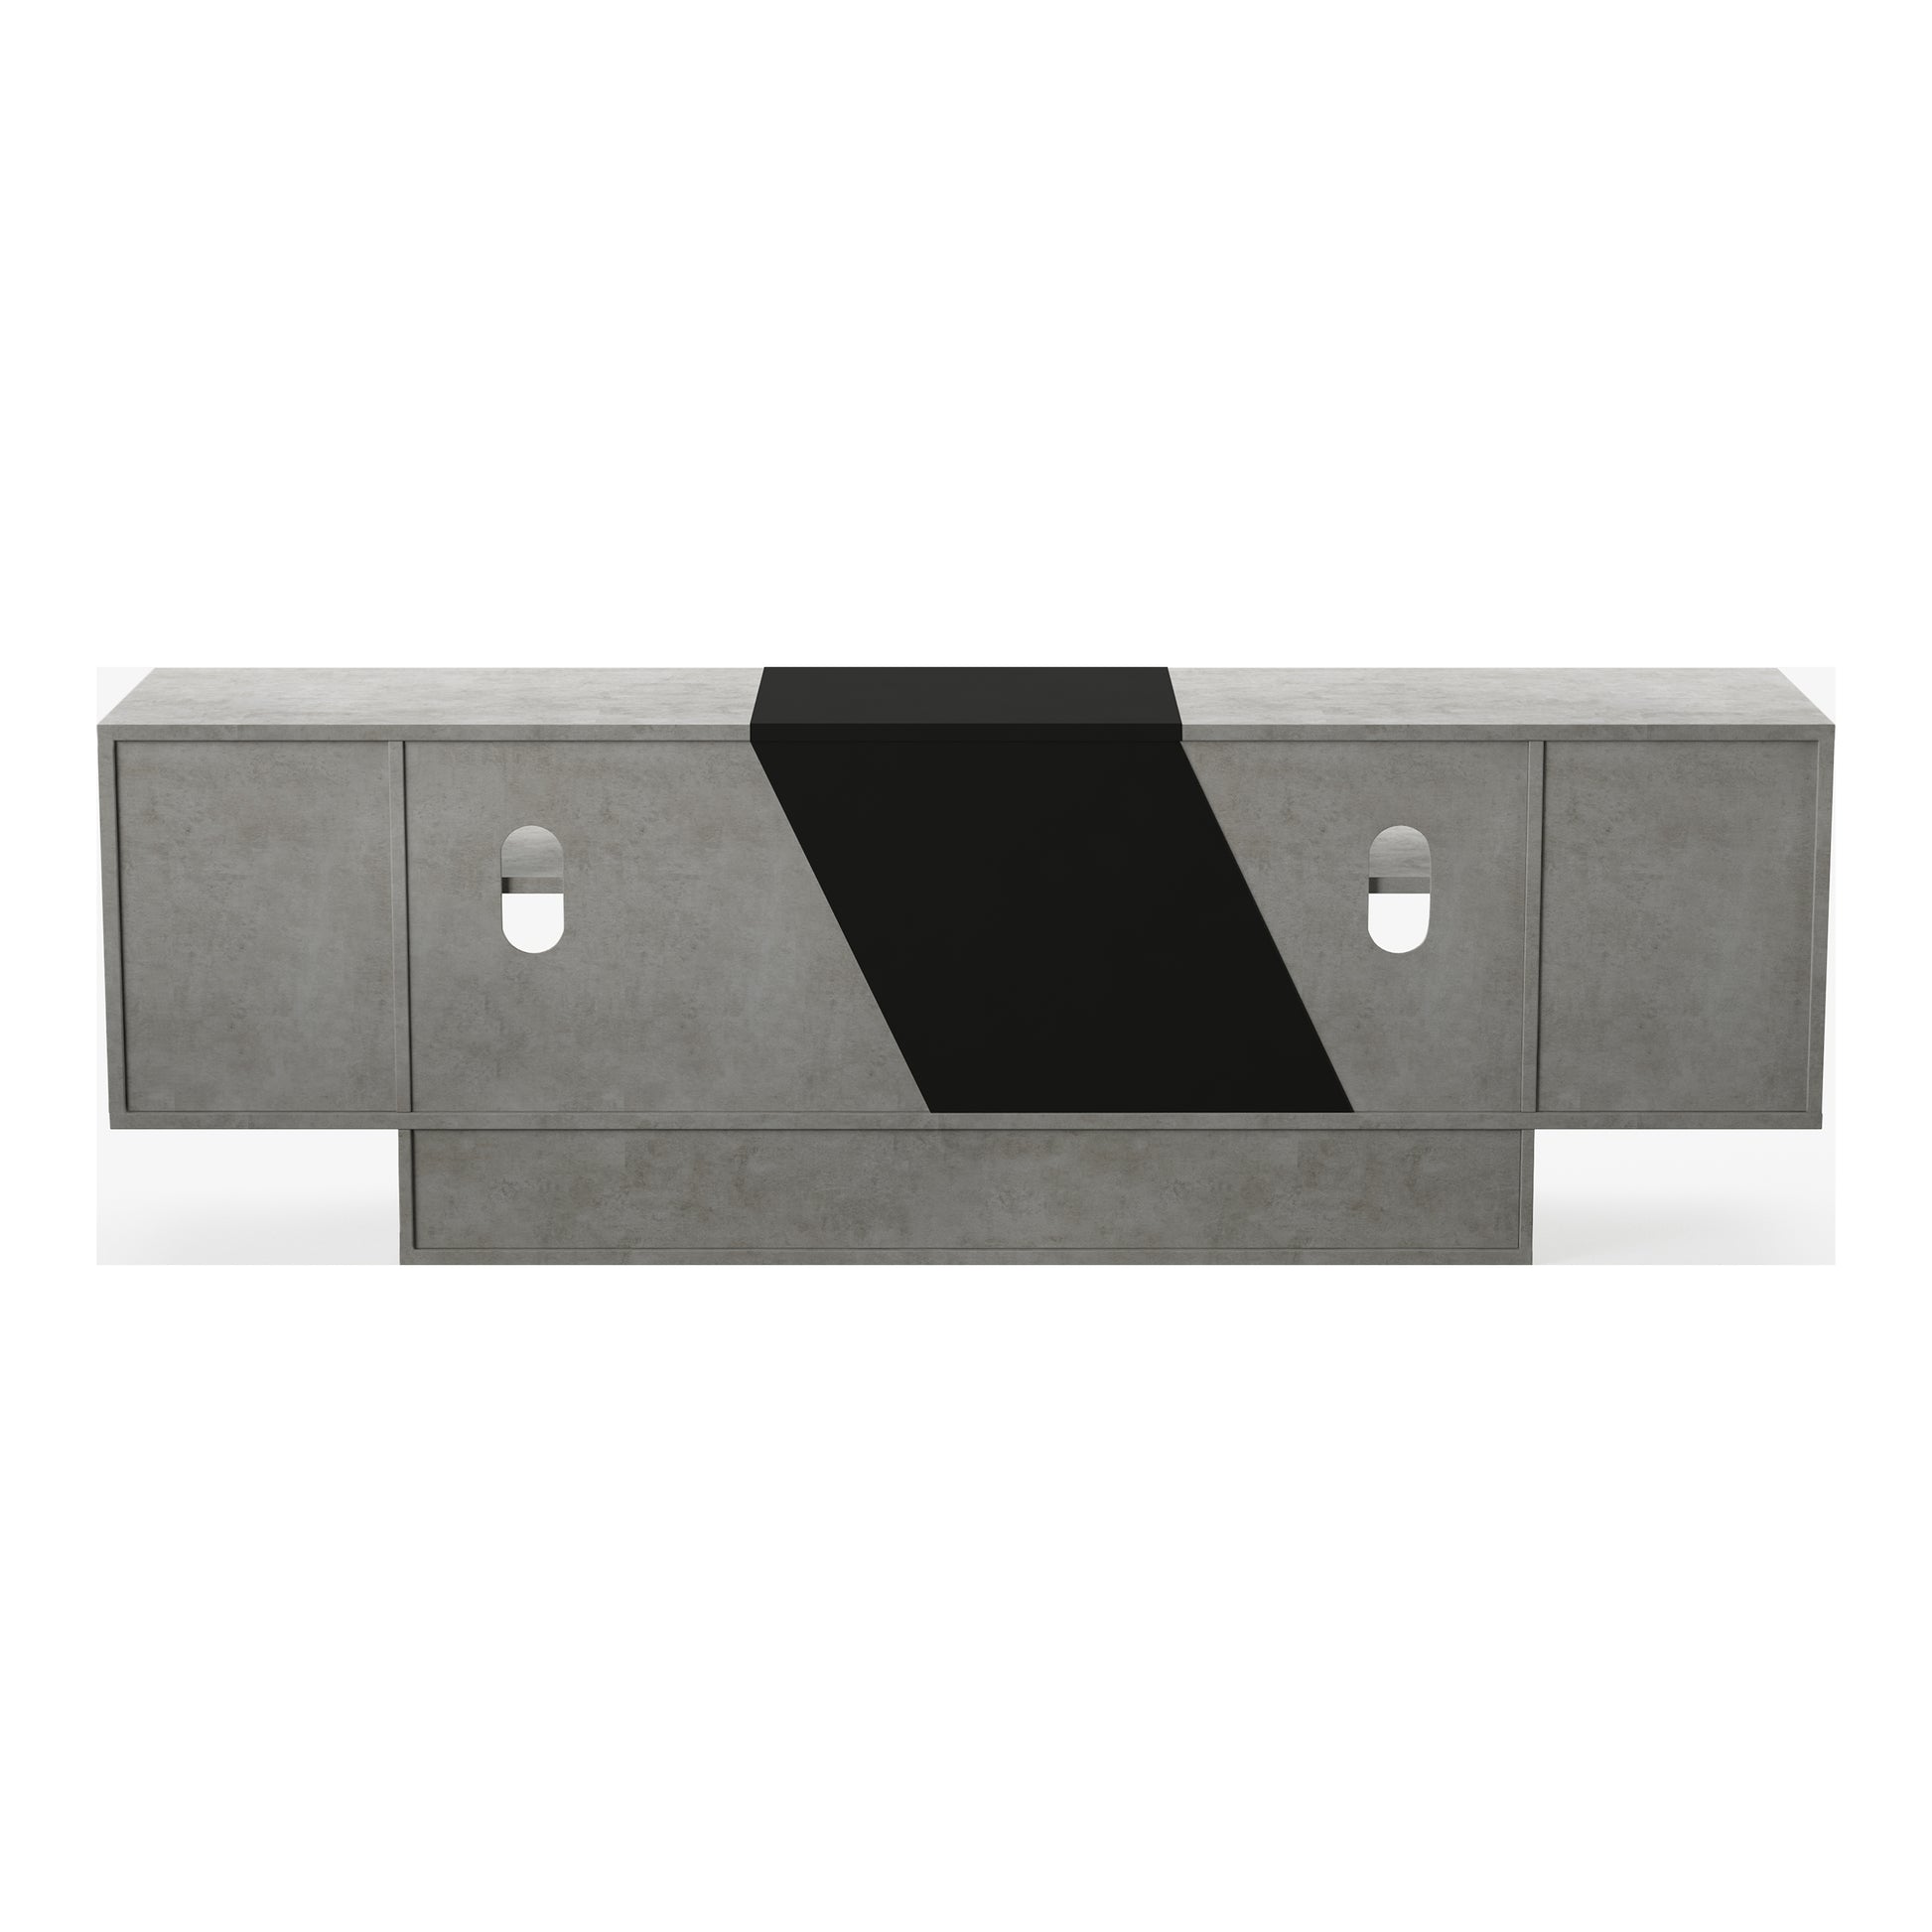 Front-facing back view of a modern cement gray and black six-shelf TV stand with doors open on a white background